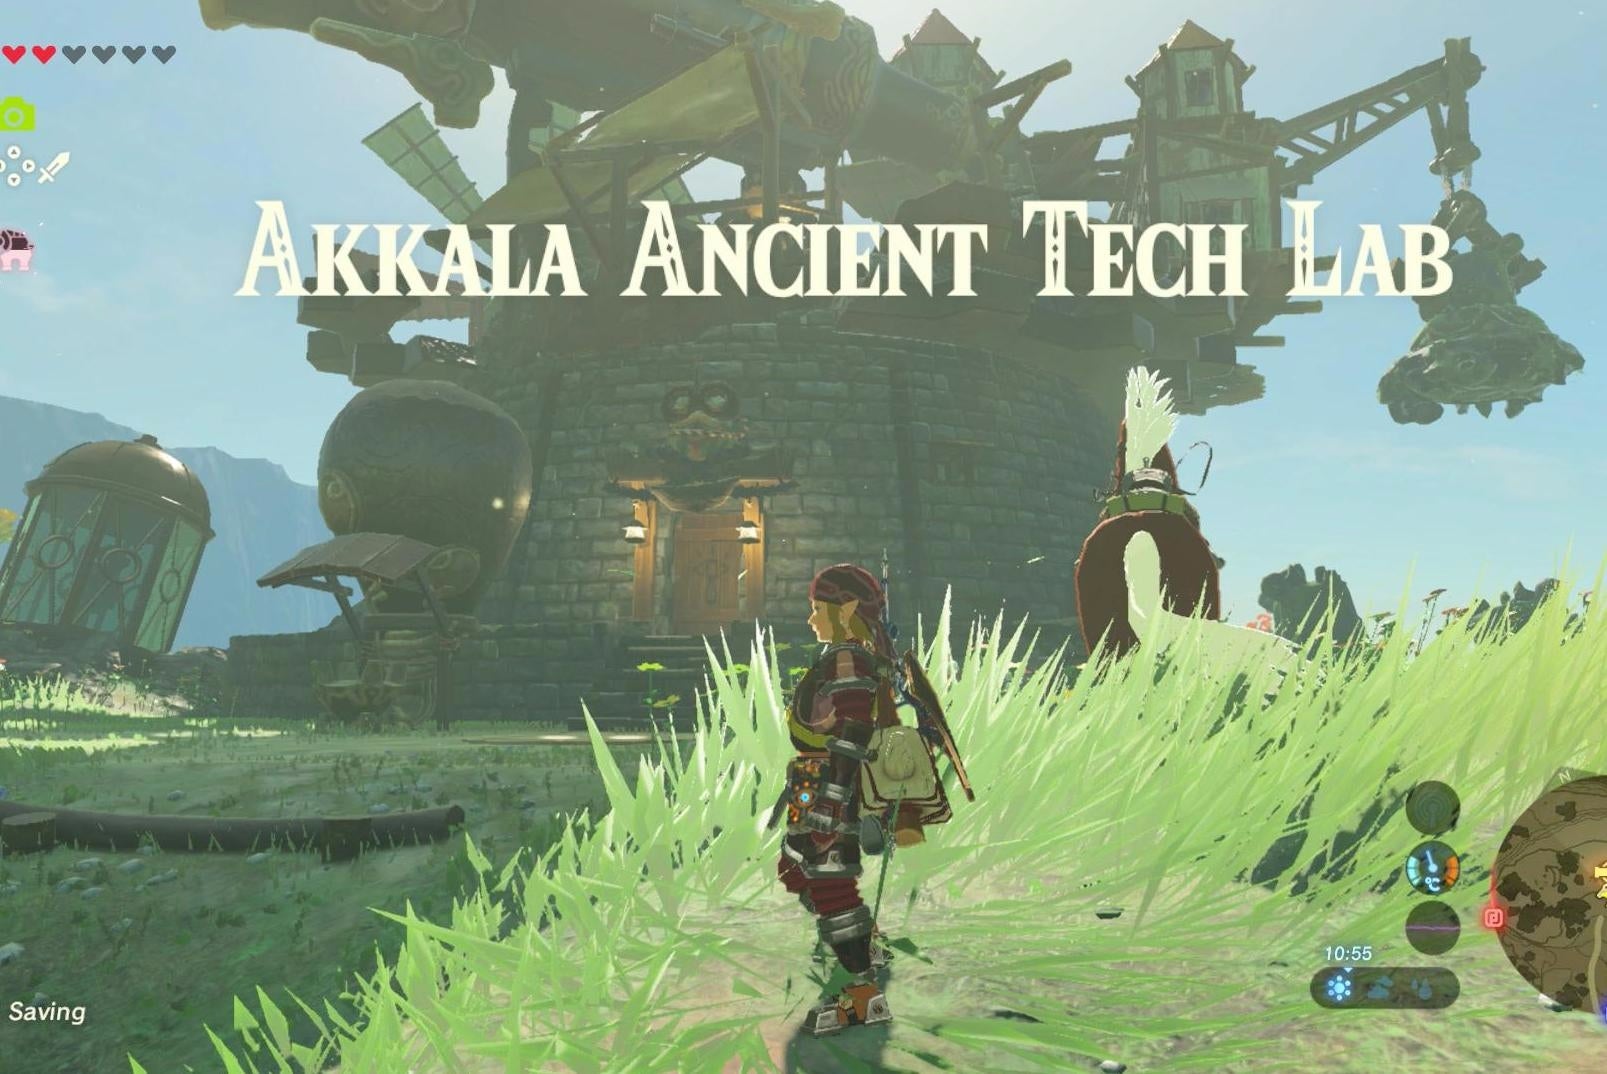 Image for Zelda: Breath of the Wild best armour - Ancient Armour, Robbies Research, and the Akkala Ancient Tech Lab